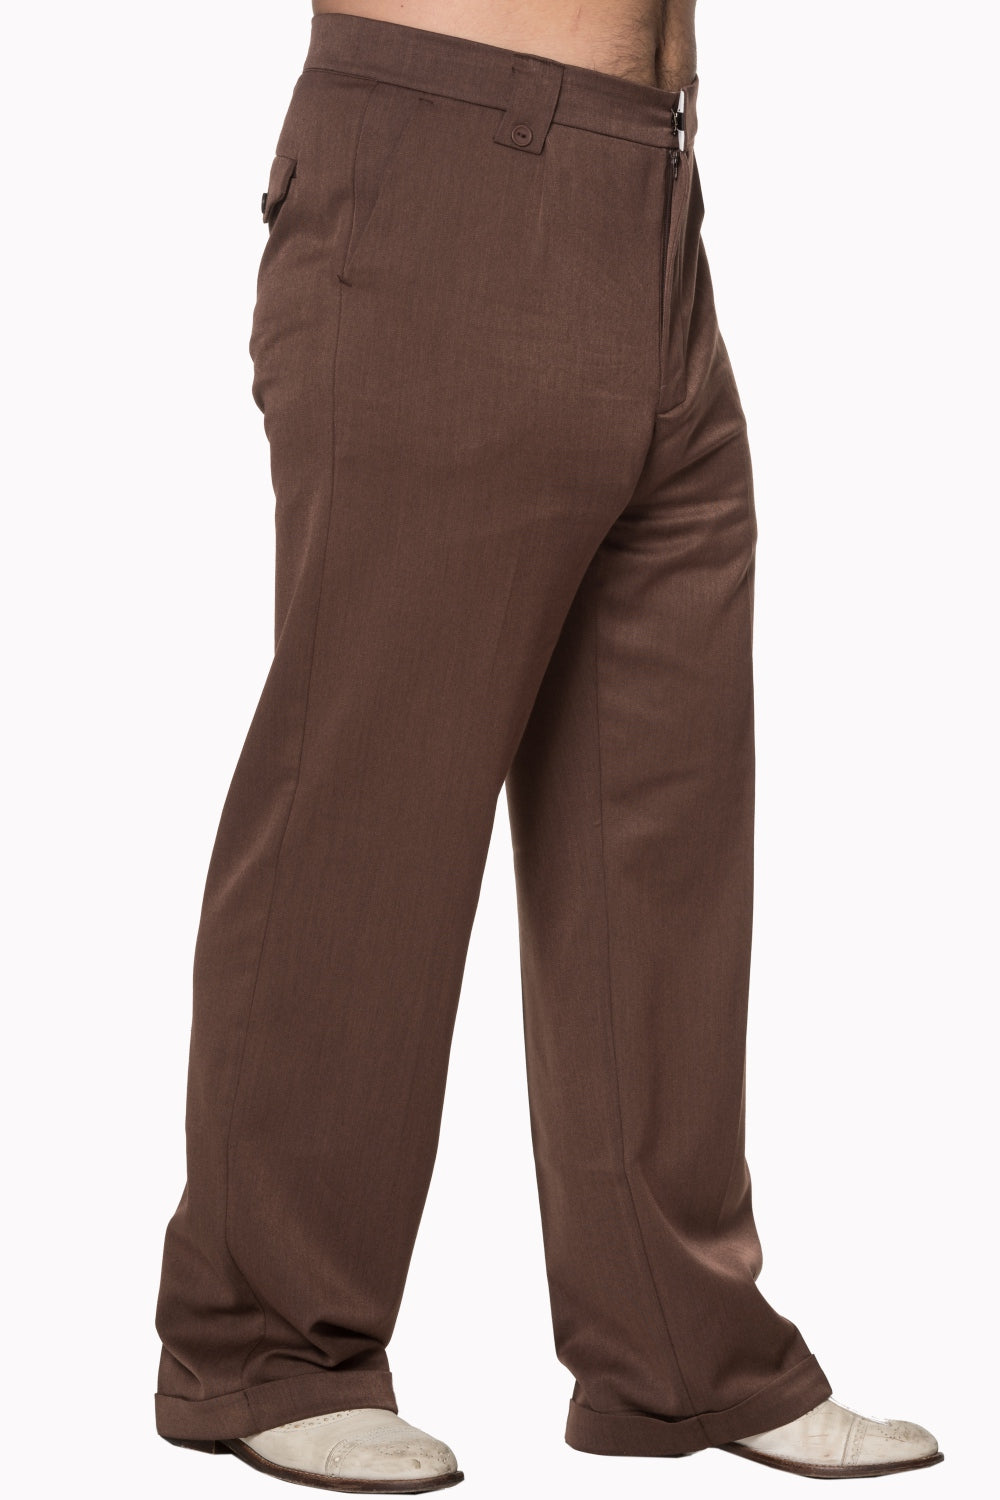 Banned Get In Line Brown 40s 50s Style Turn Up Trousers; Banned; Get In Line Trousers; Brown Turn Ups; Side View